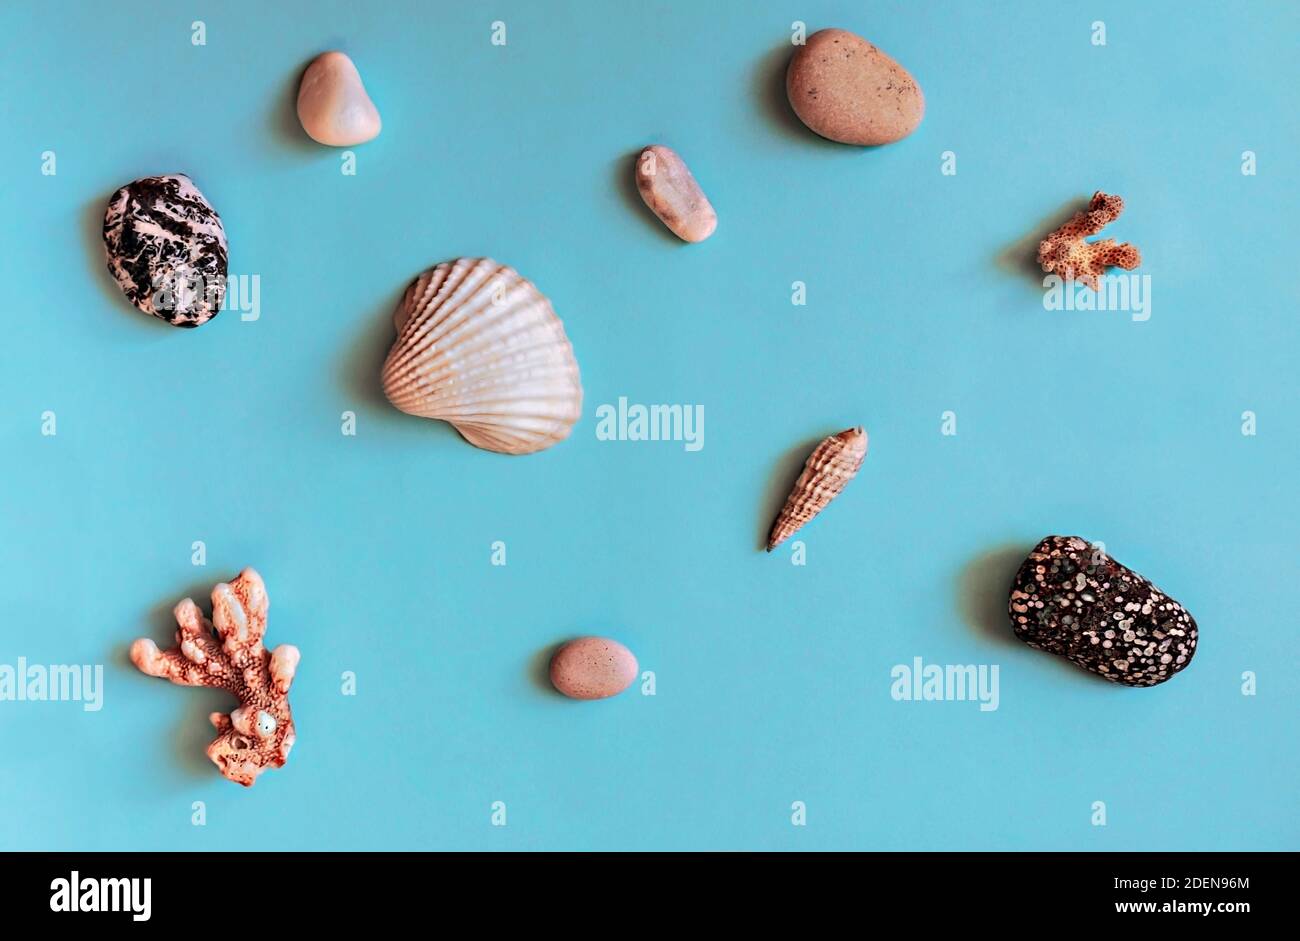 Abstract blue background with sea objects - pebble stones, seashells, corals. Design elements, flat lay, wallpaper Stock Photo